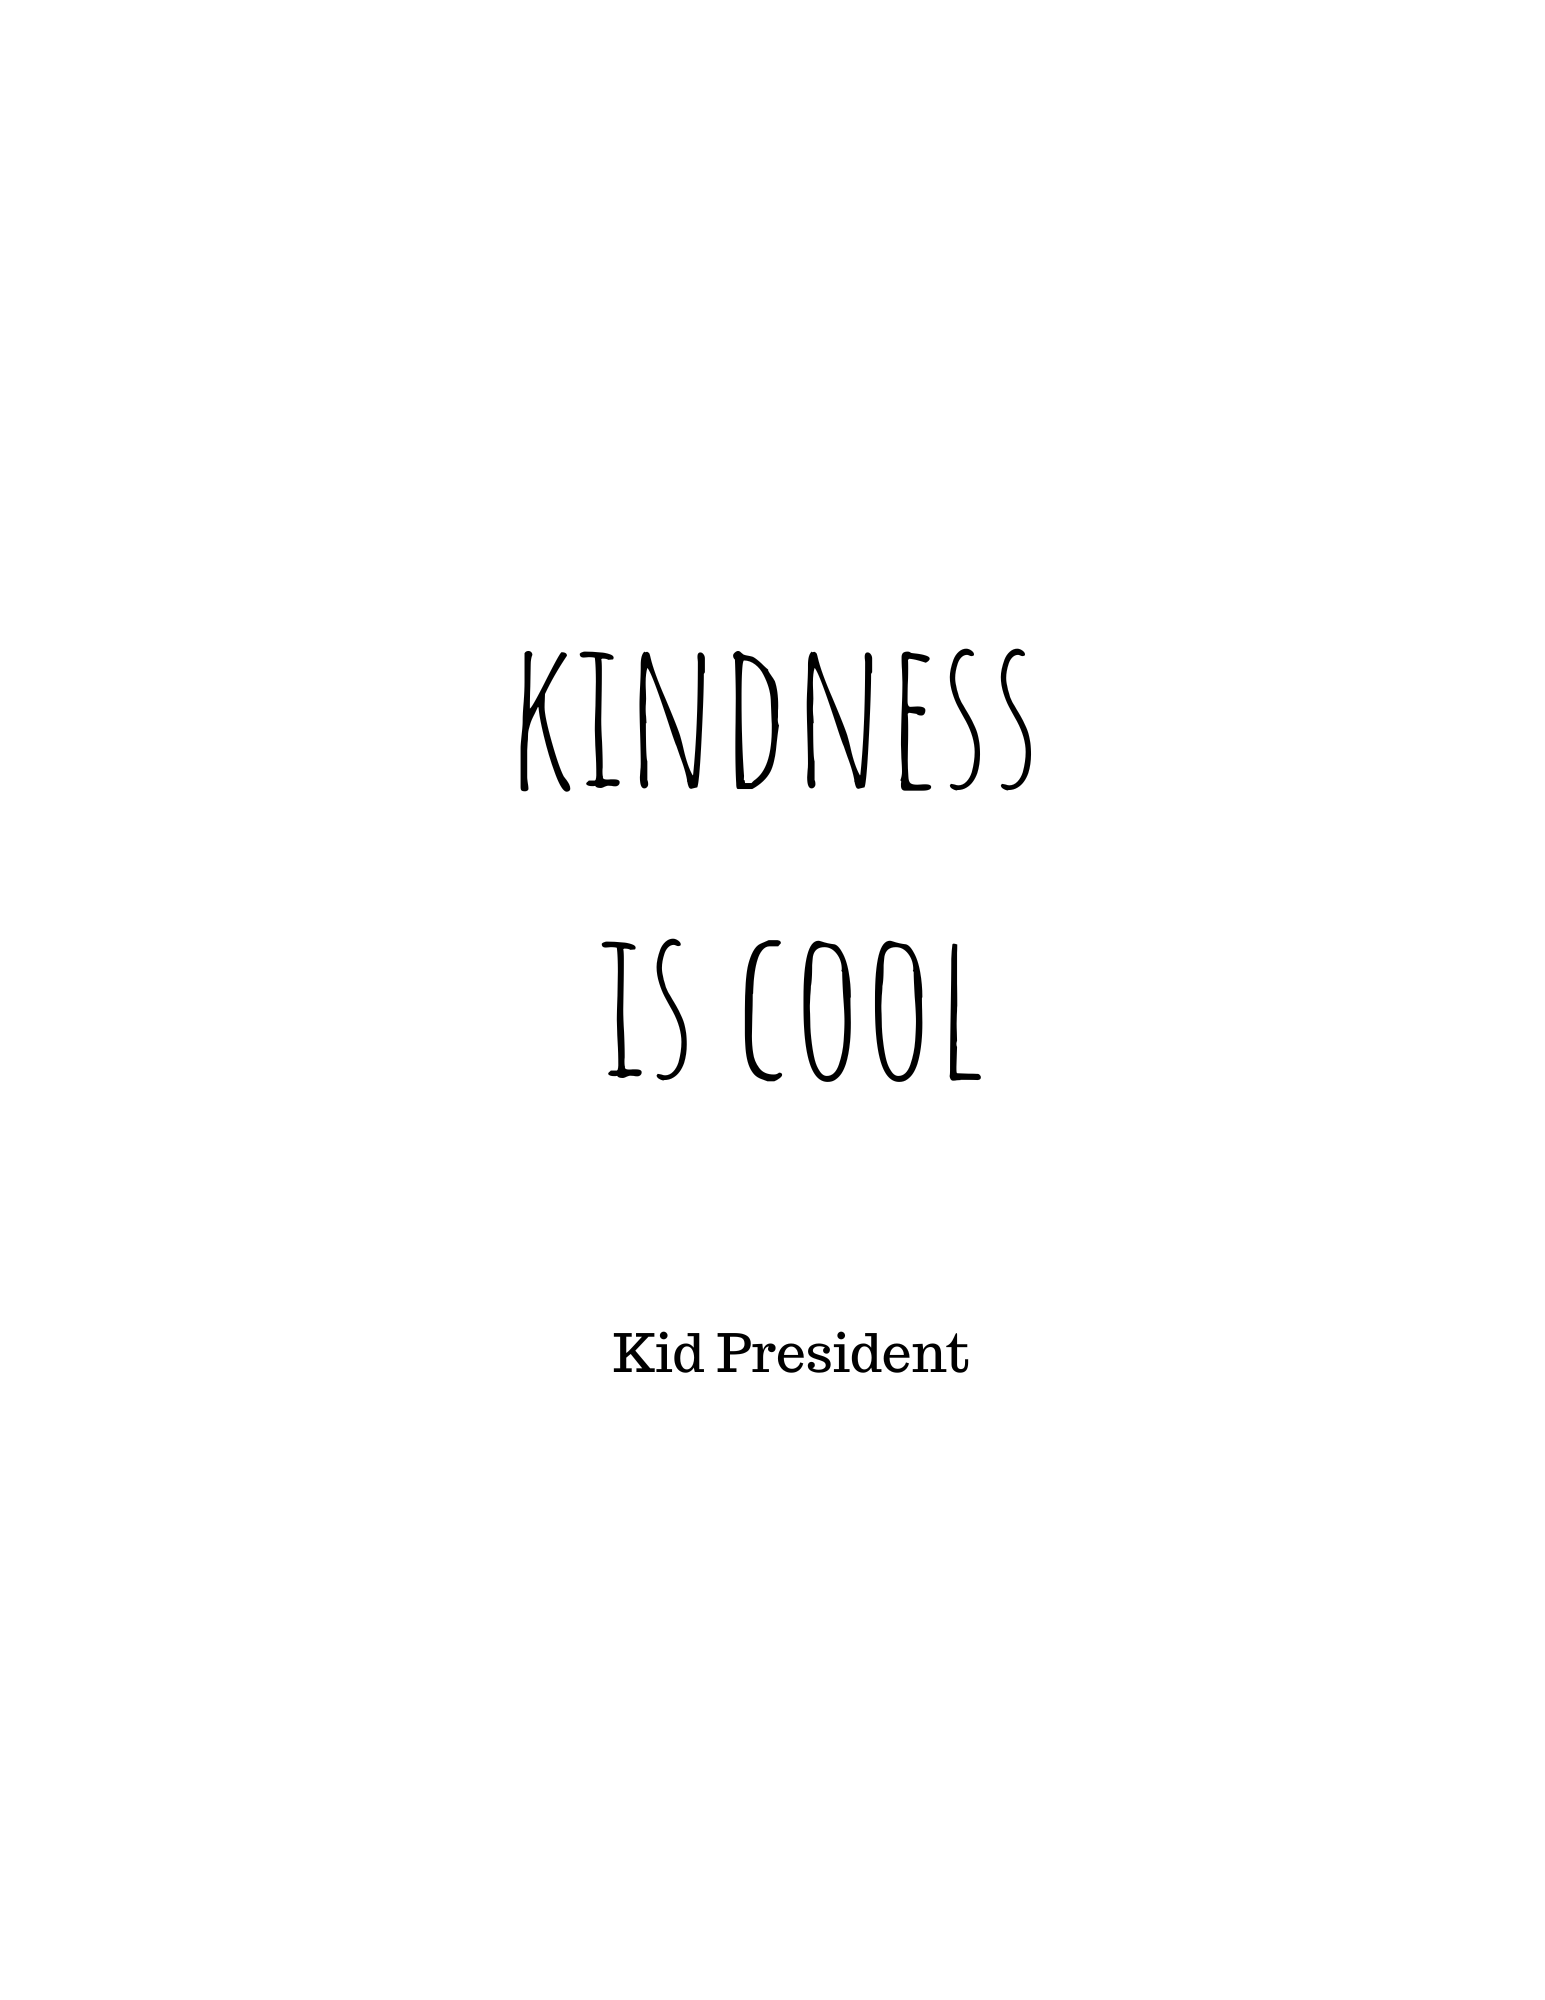 Kindness is cool - a printable quote for the classroom by Kid President